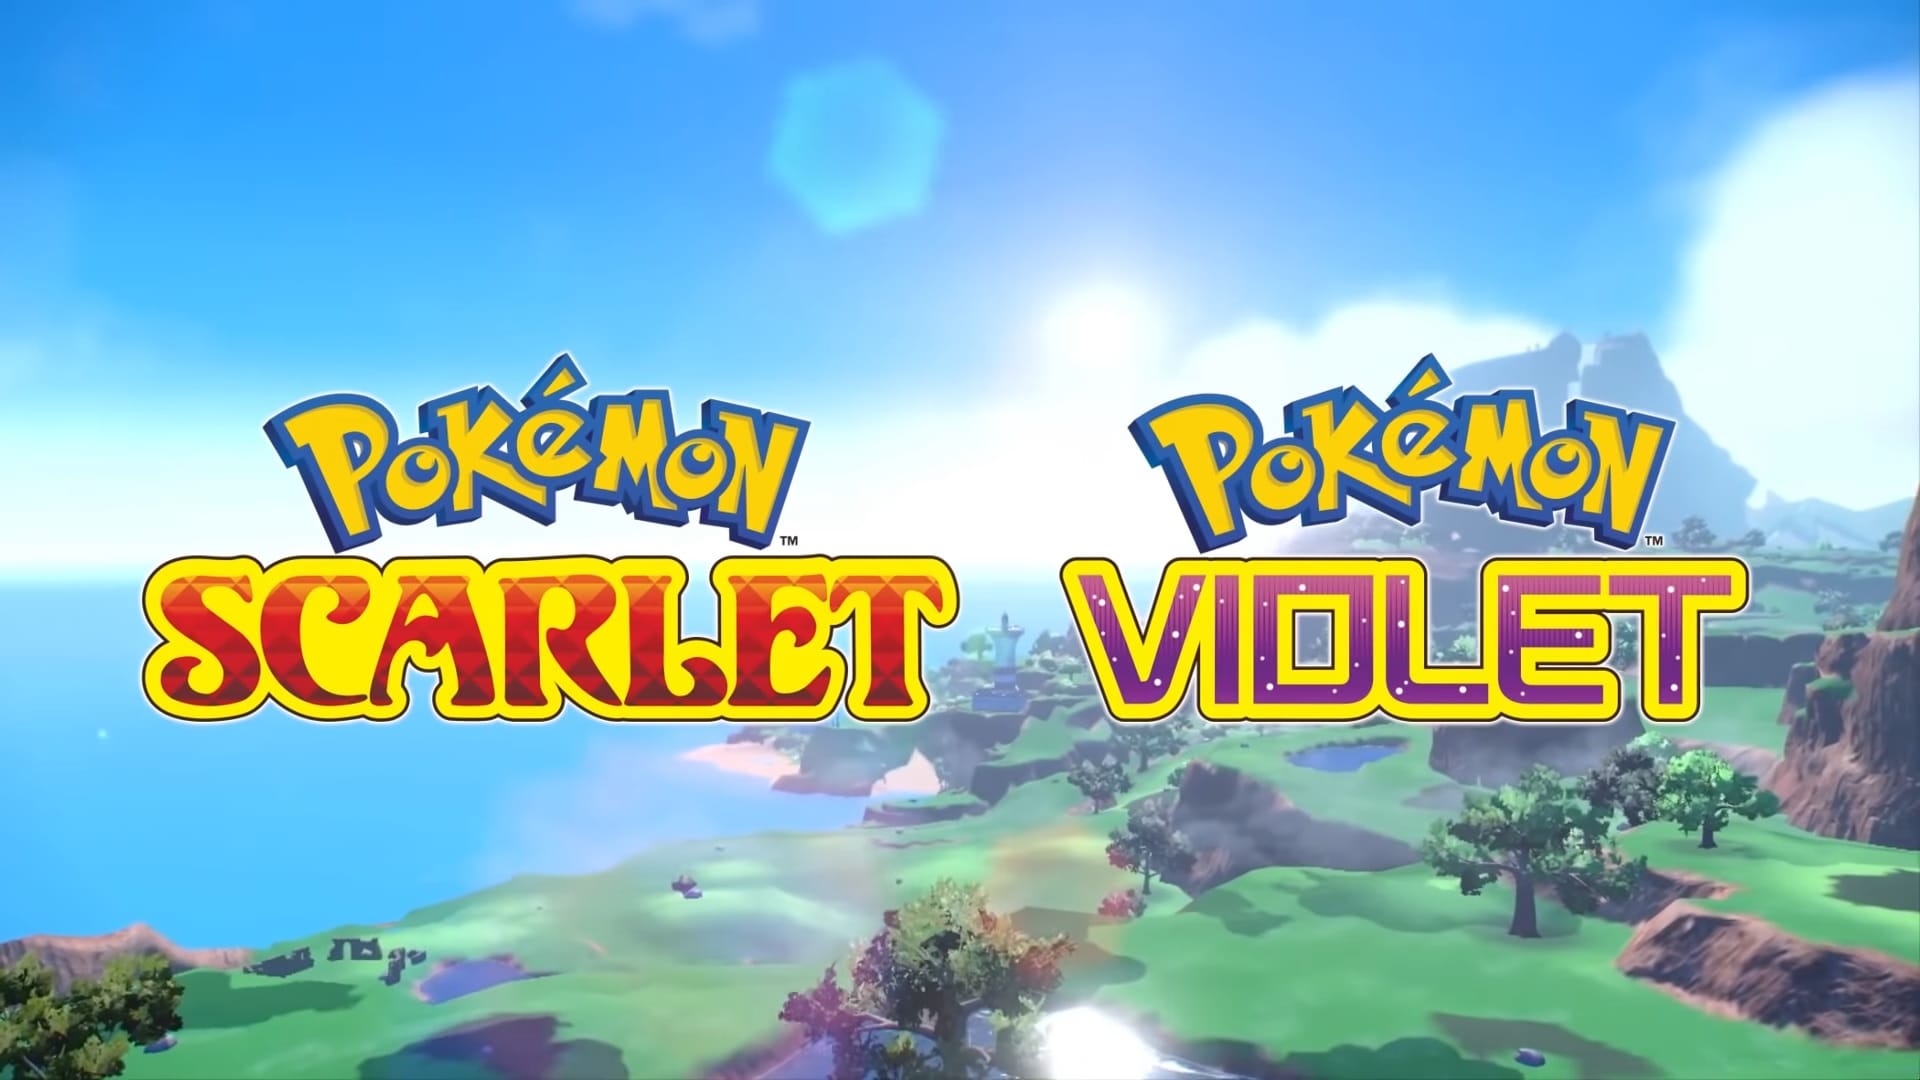 How to Install Pokémon Scarlet and Violet on your PC Today